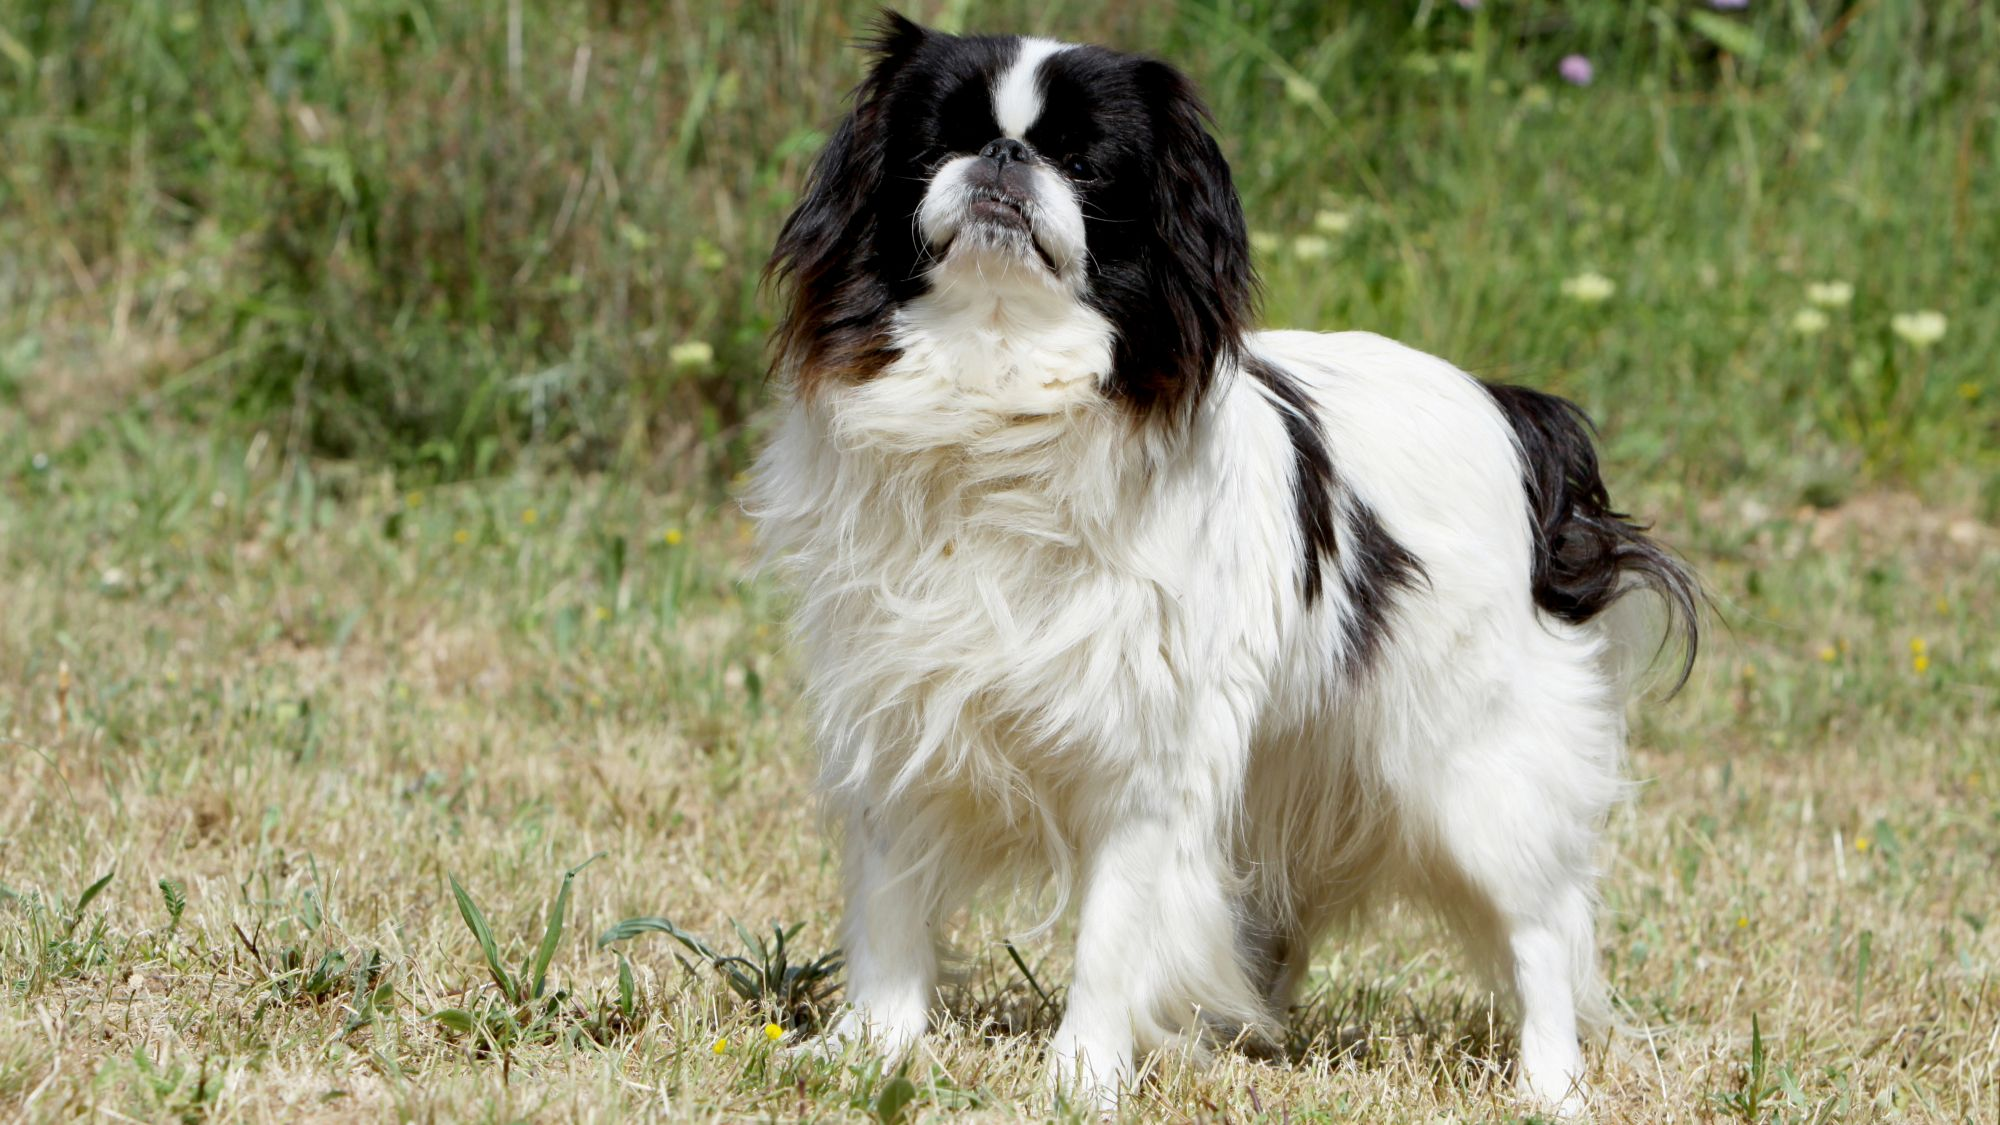 Black and white Japanese Chin stood in grass